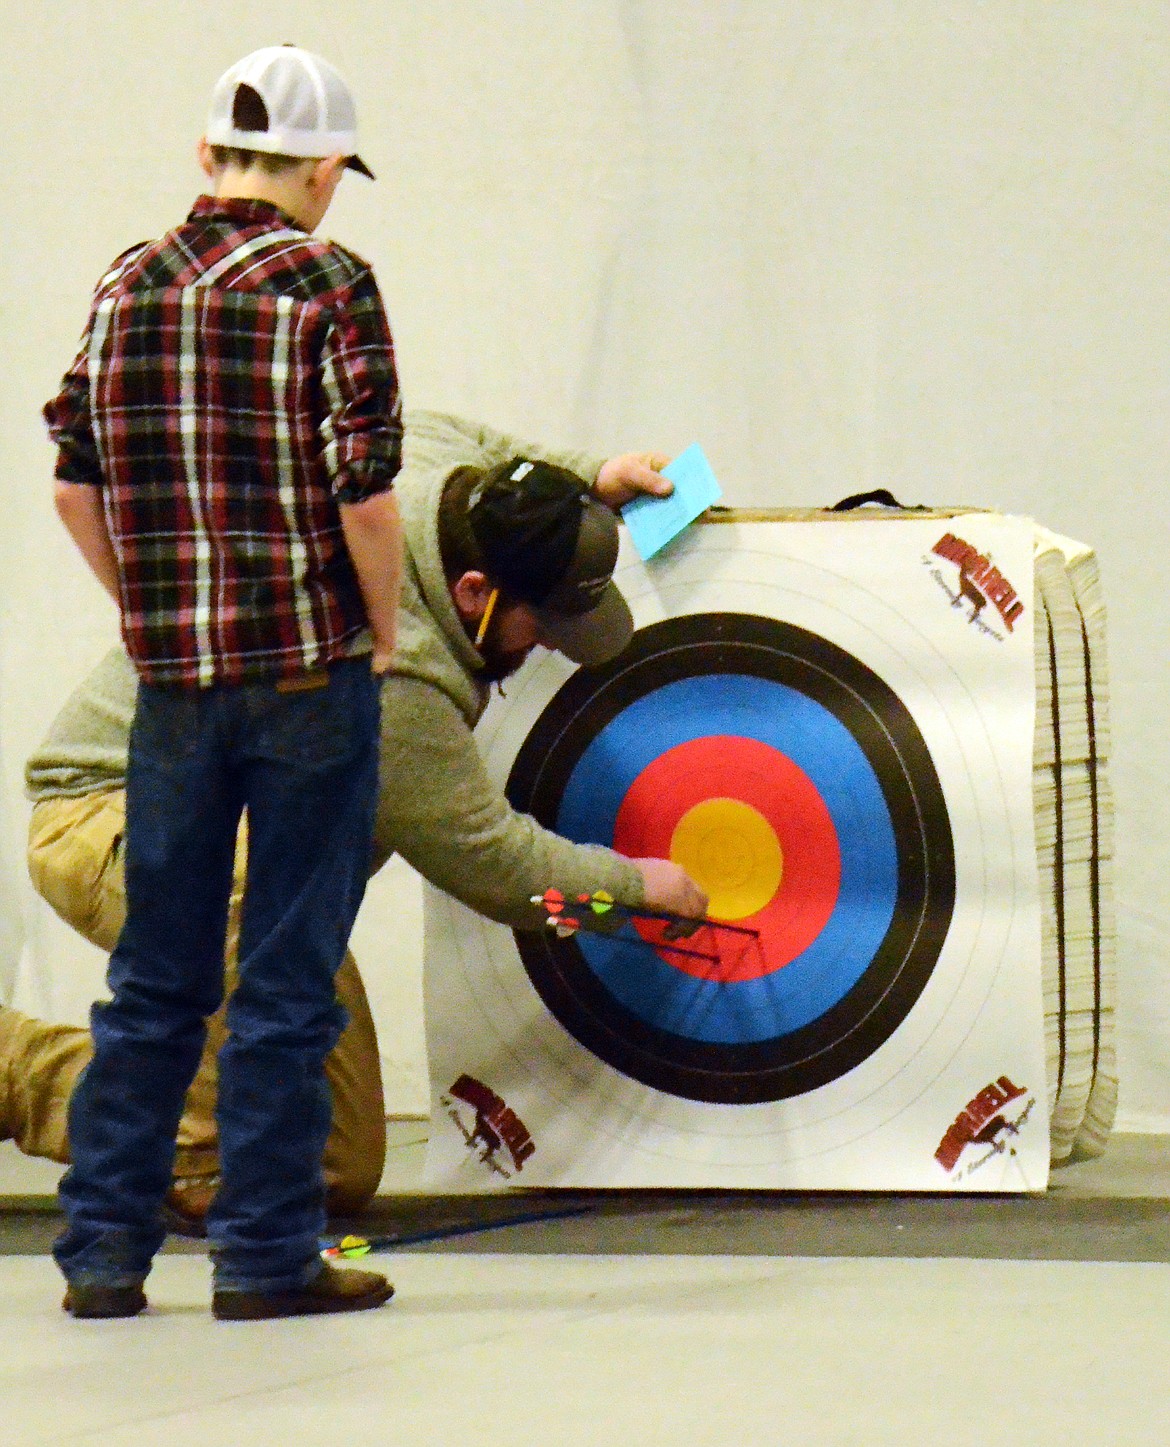 Scorer Matthew Faroni checks Justin Perry&#146;s shots on the bullseye after his third round shot on the 10-meter line. (Erin Jusseaume/ Clark Fork Valley Press)